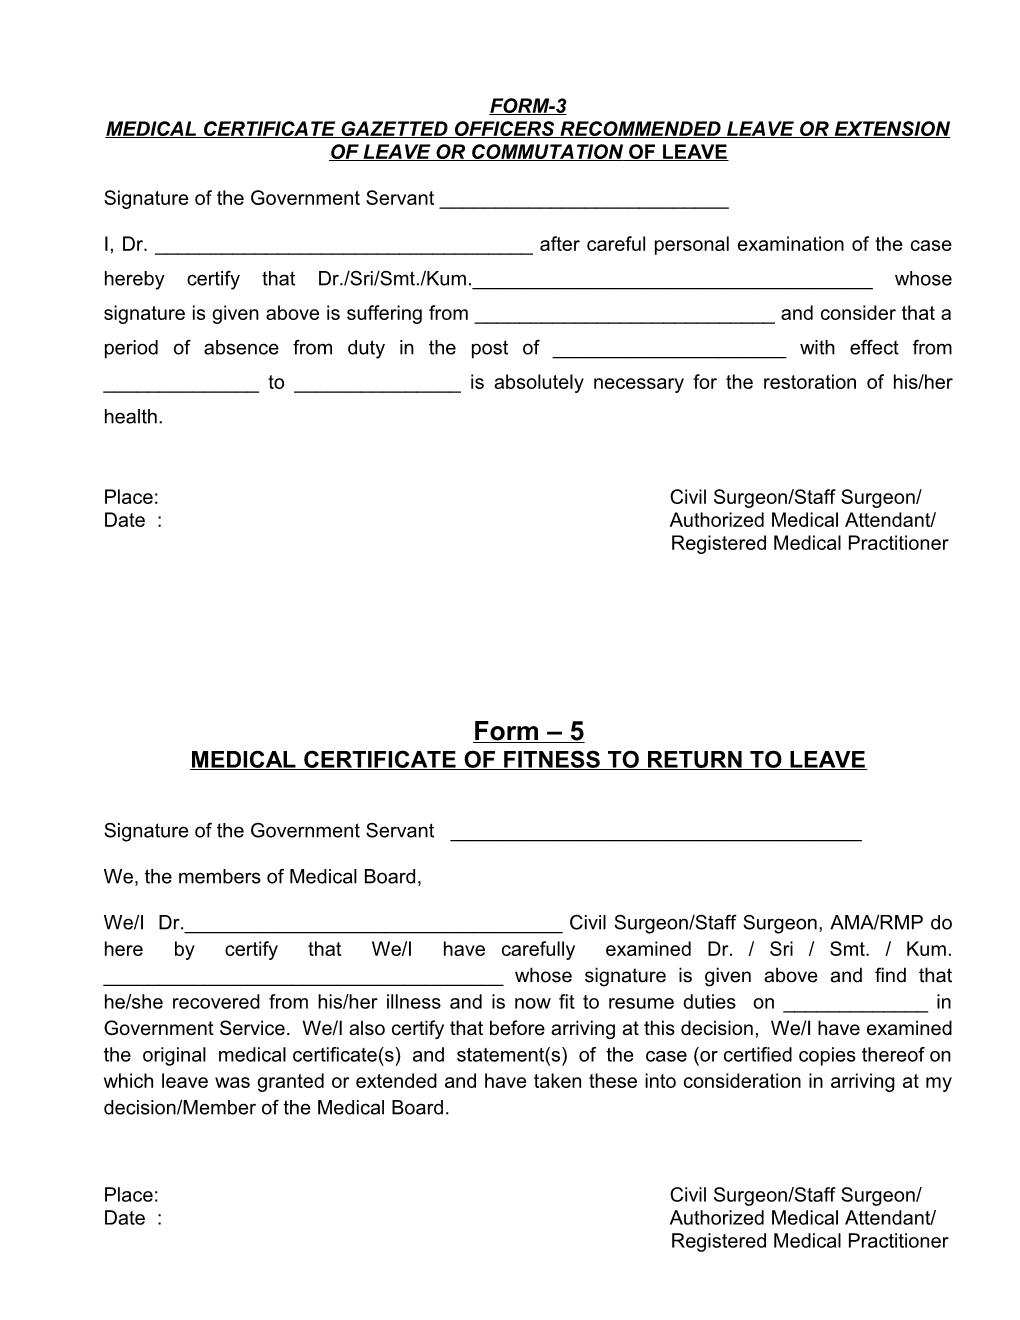 Medical Certificate Gazetted Officers Recommended Leave Or Extension of Leave Or Commutation